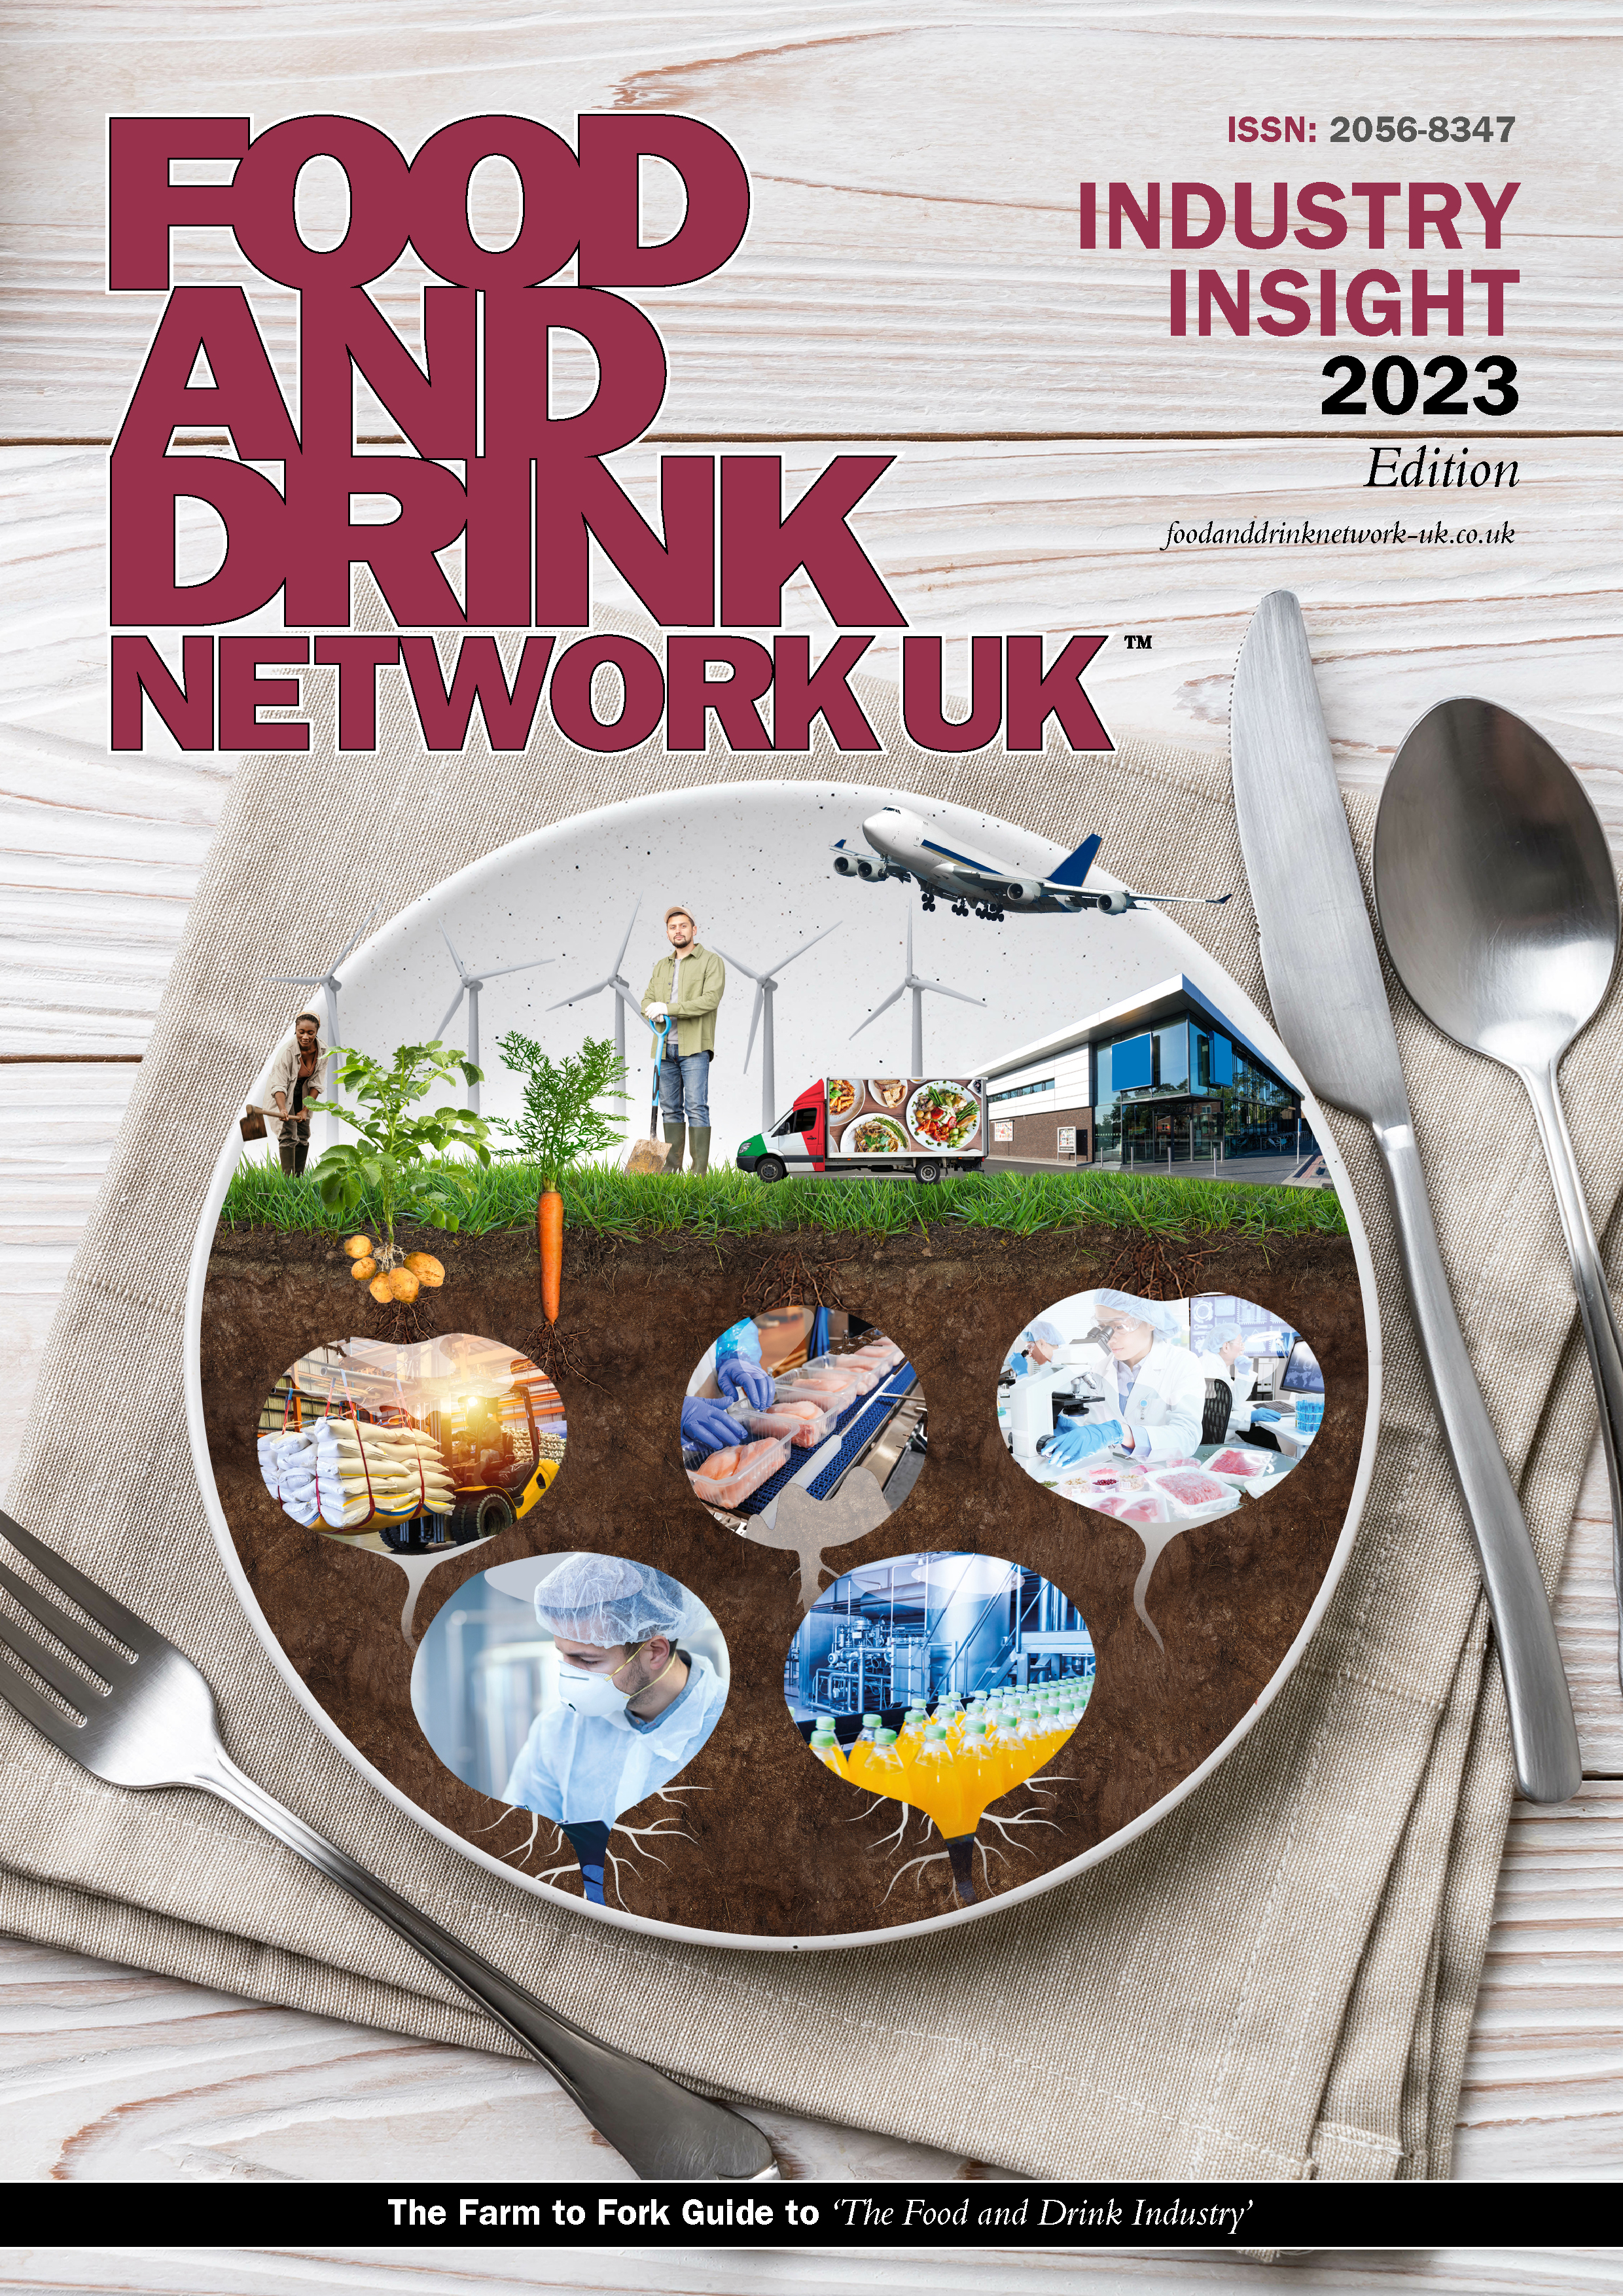 Food & Drink Industry Insight 2023